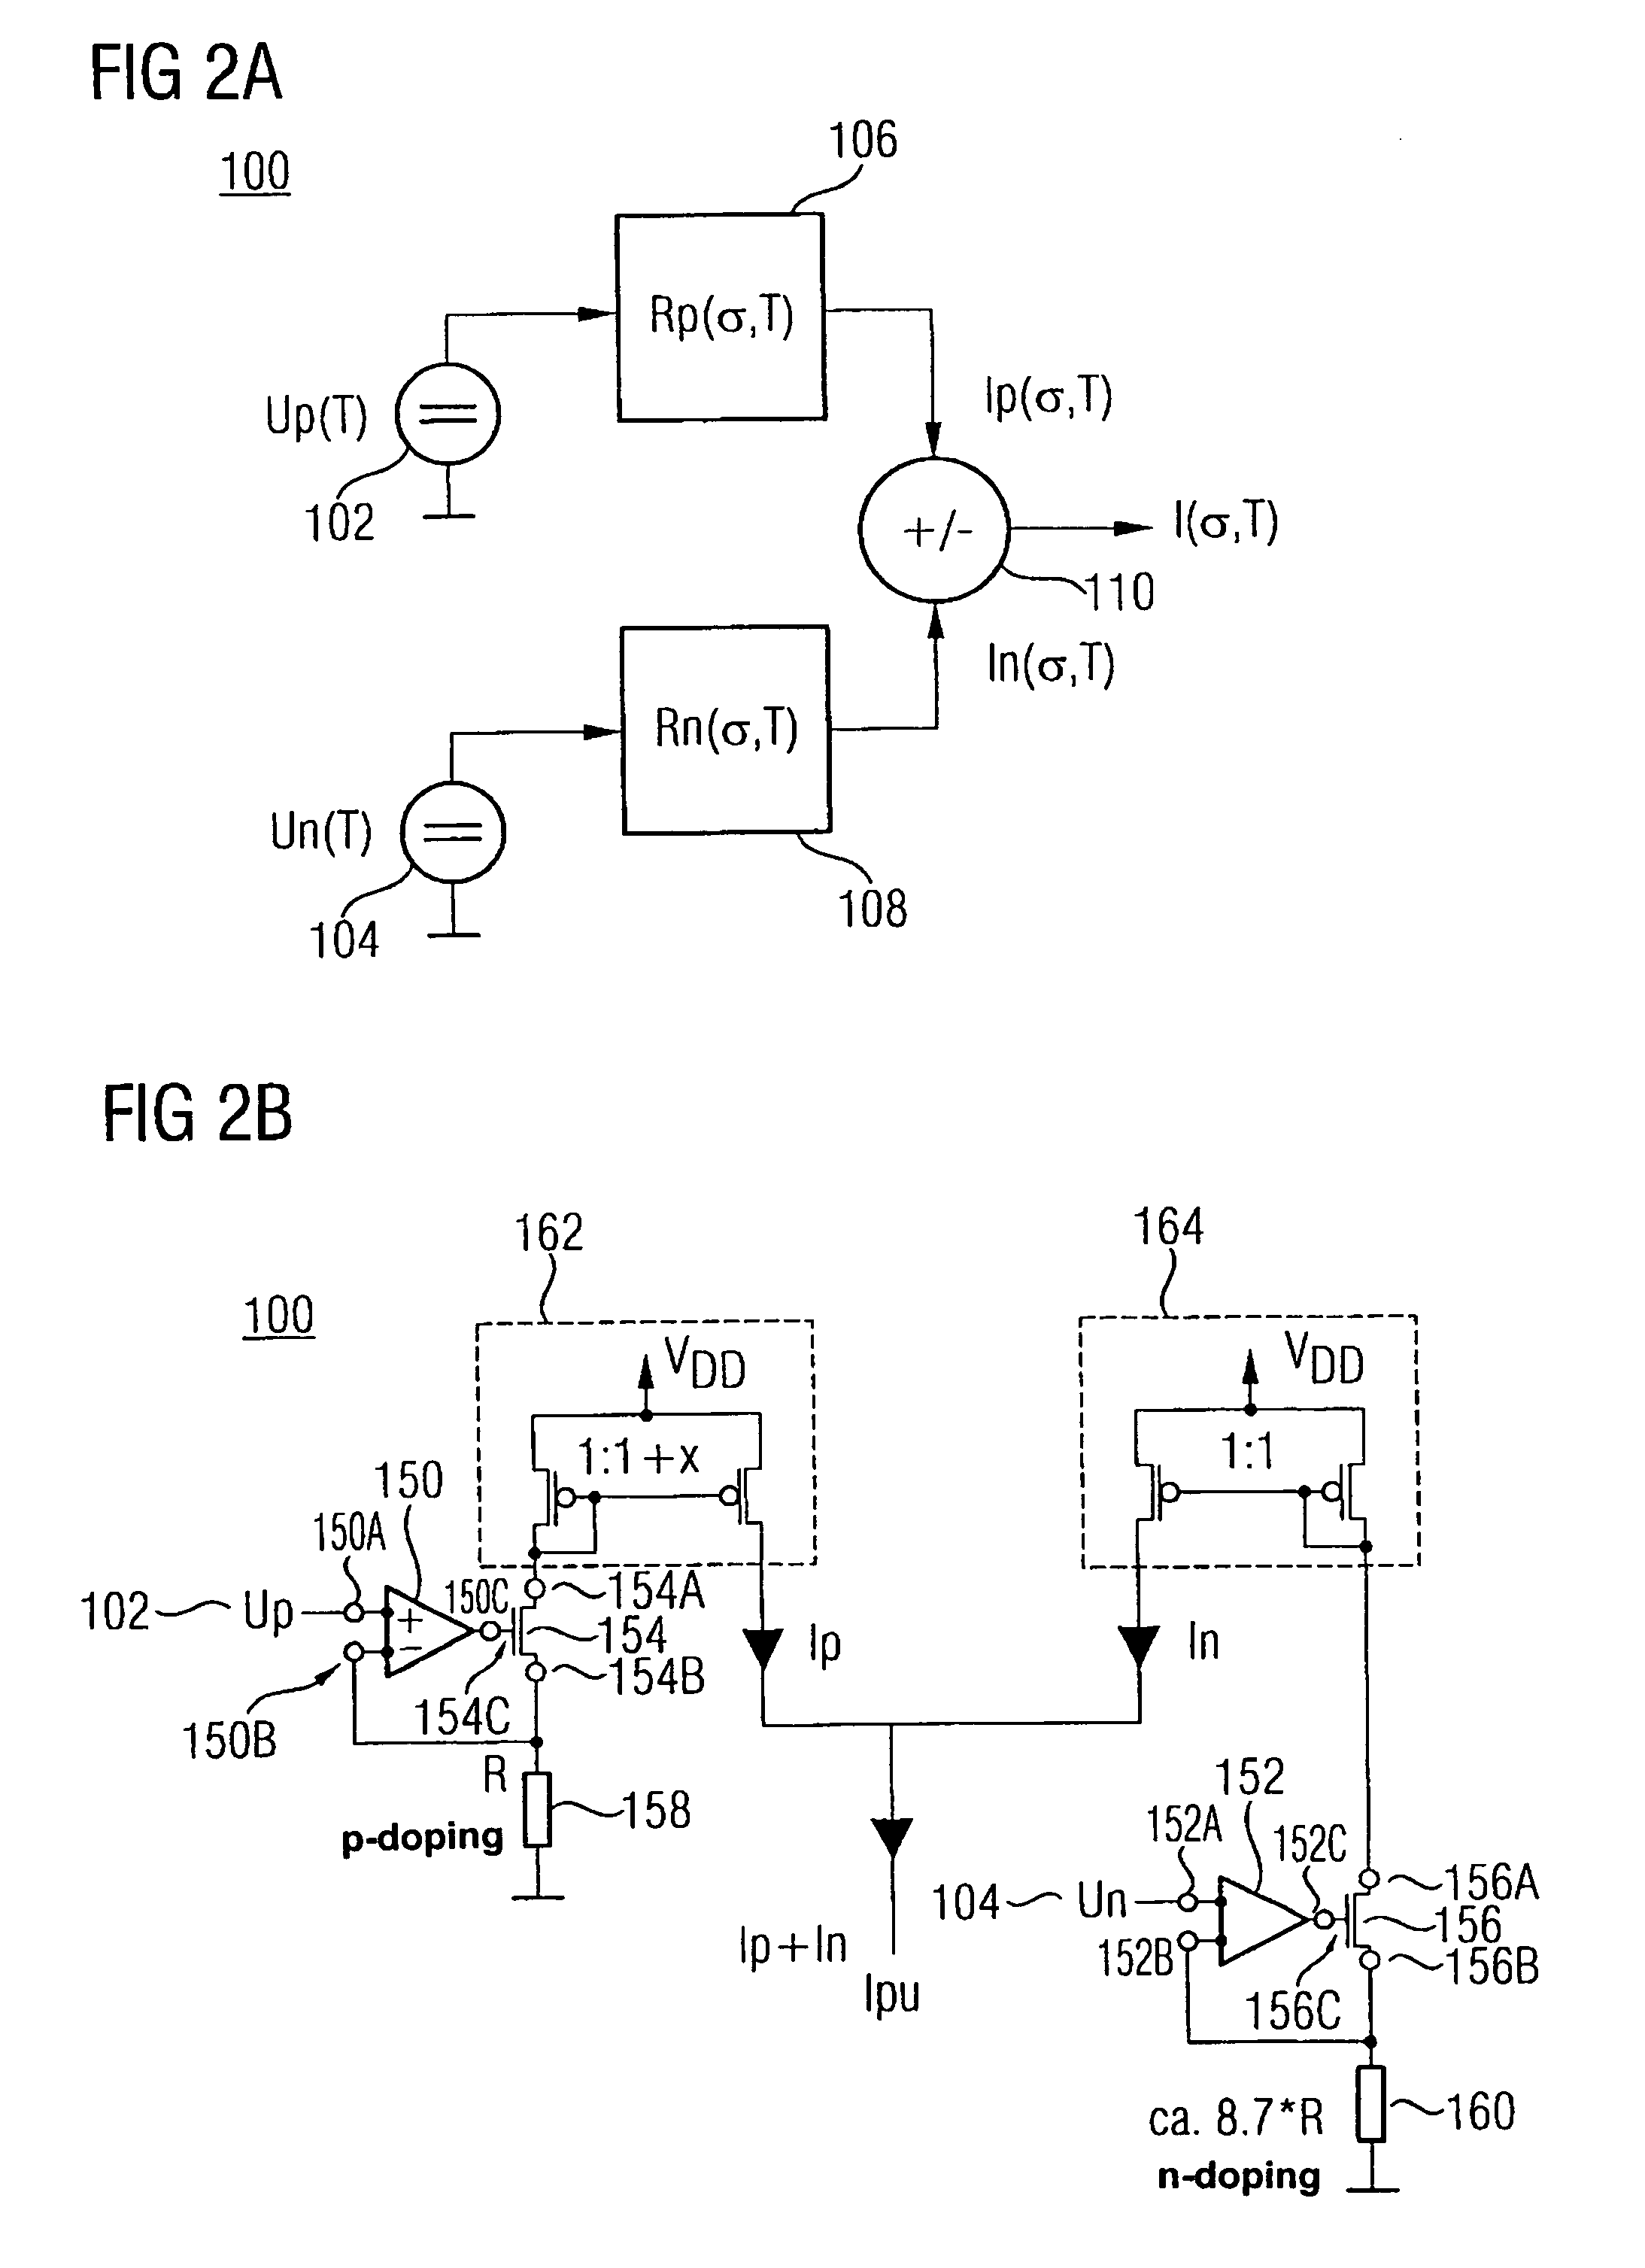 Concept of compensating for piezo influences on integrated circuitry